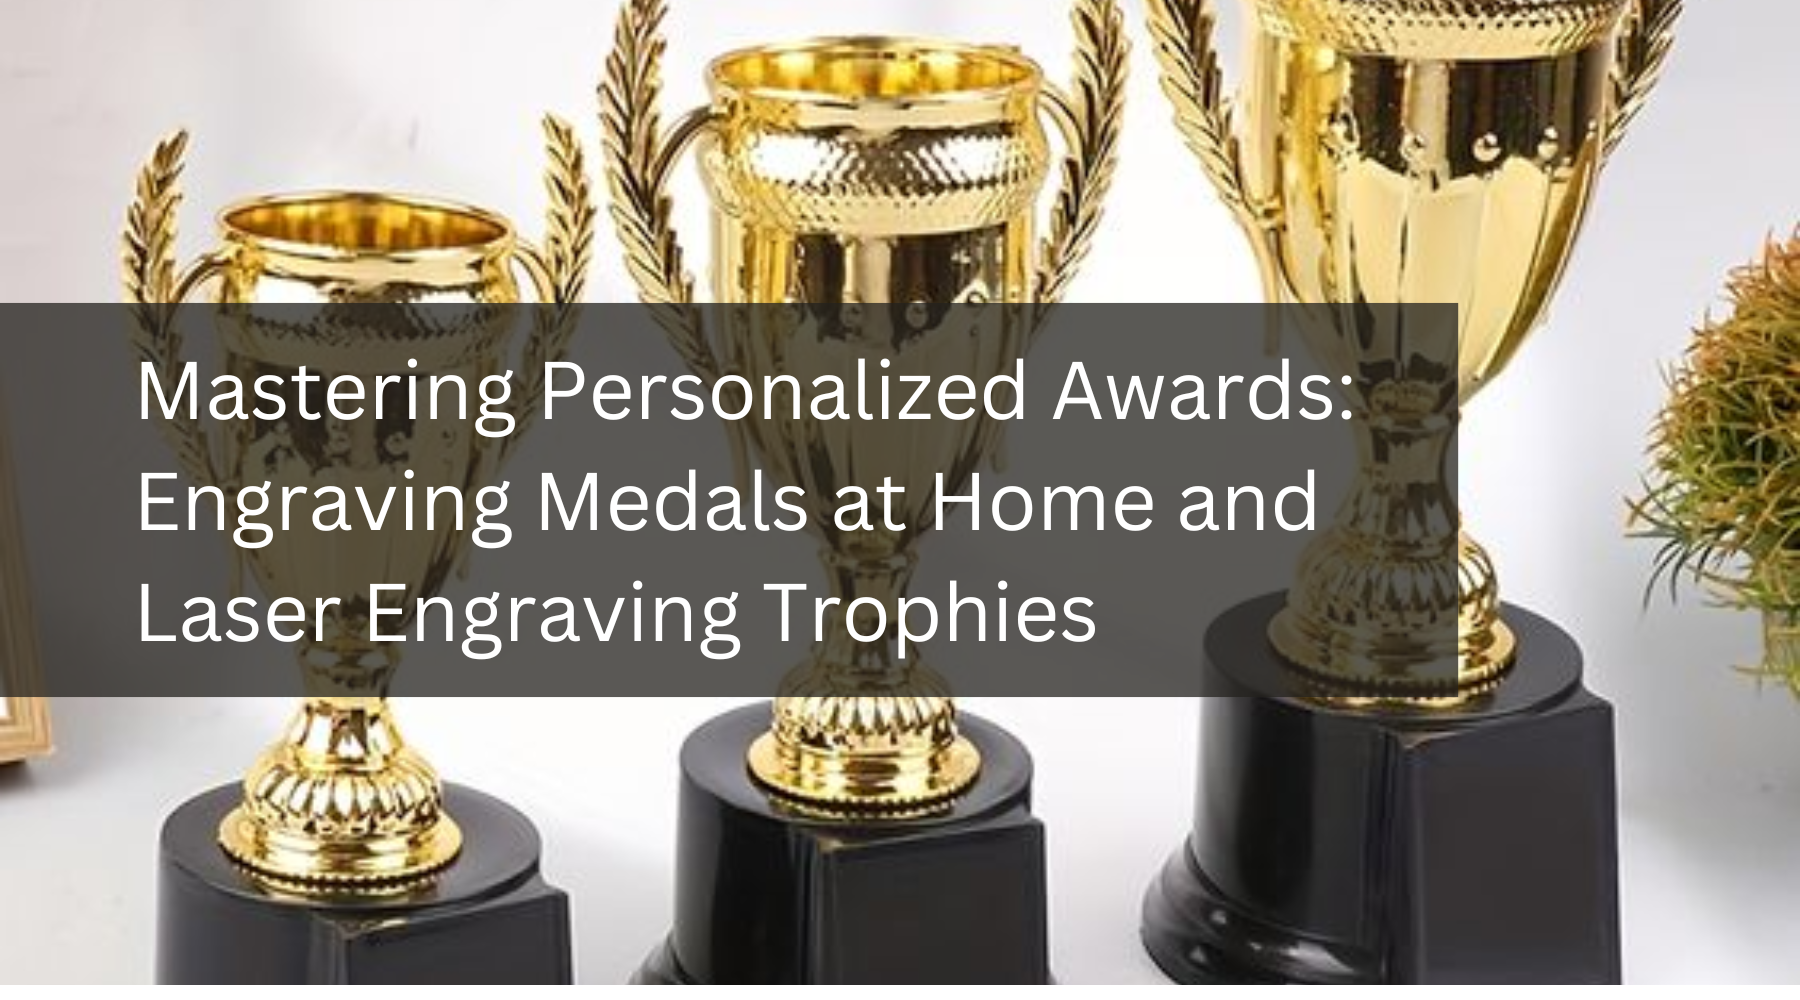 Mastering Personalized Awards: Engraving Medals at Home and Laser Engraving Trophies